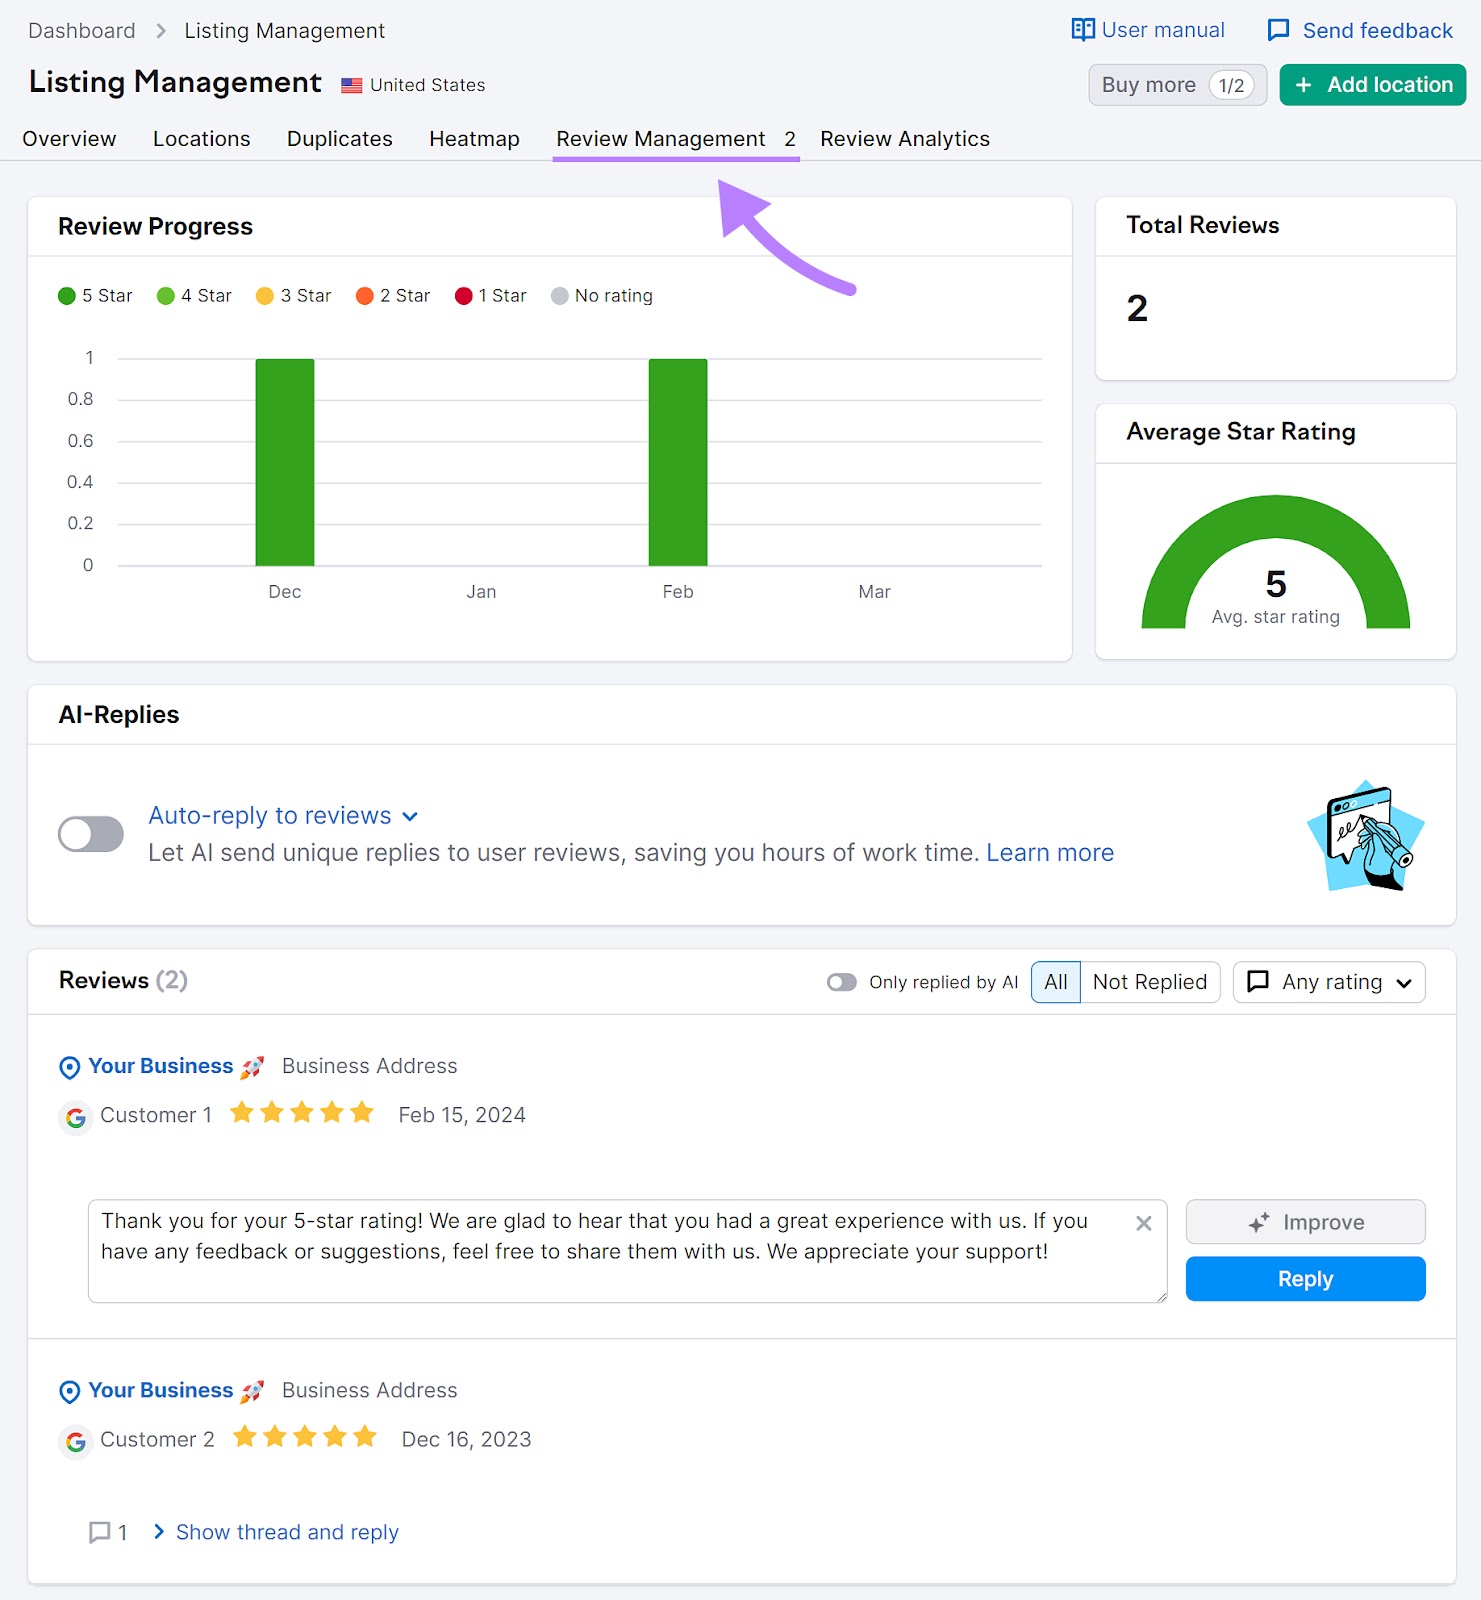 “Review Management” tab in the "Listing Management" tool.